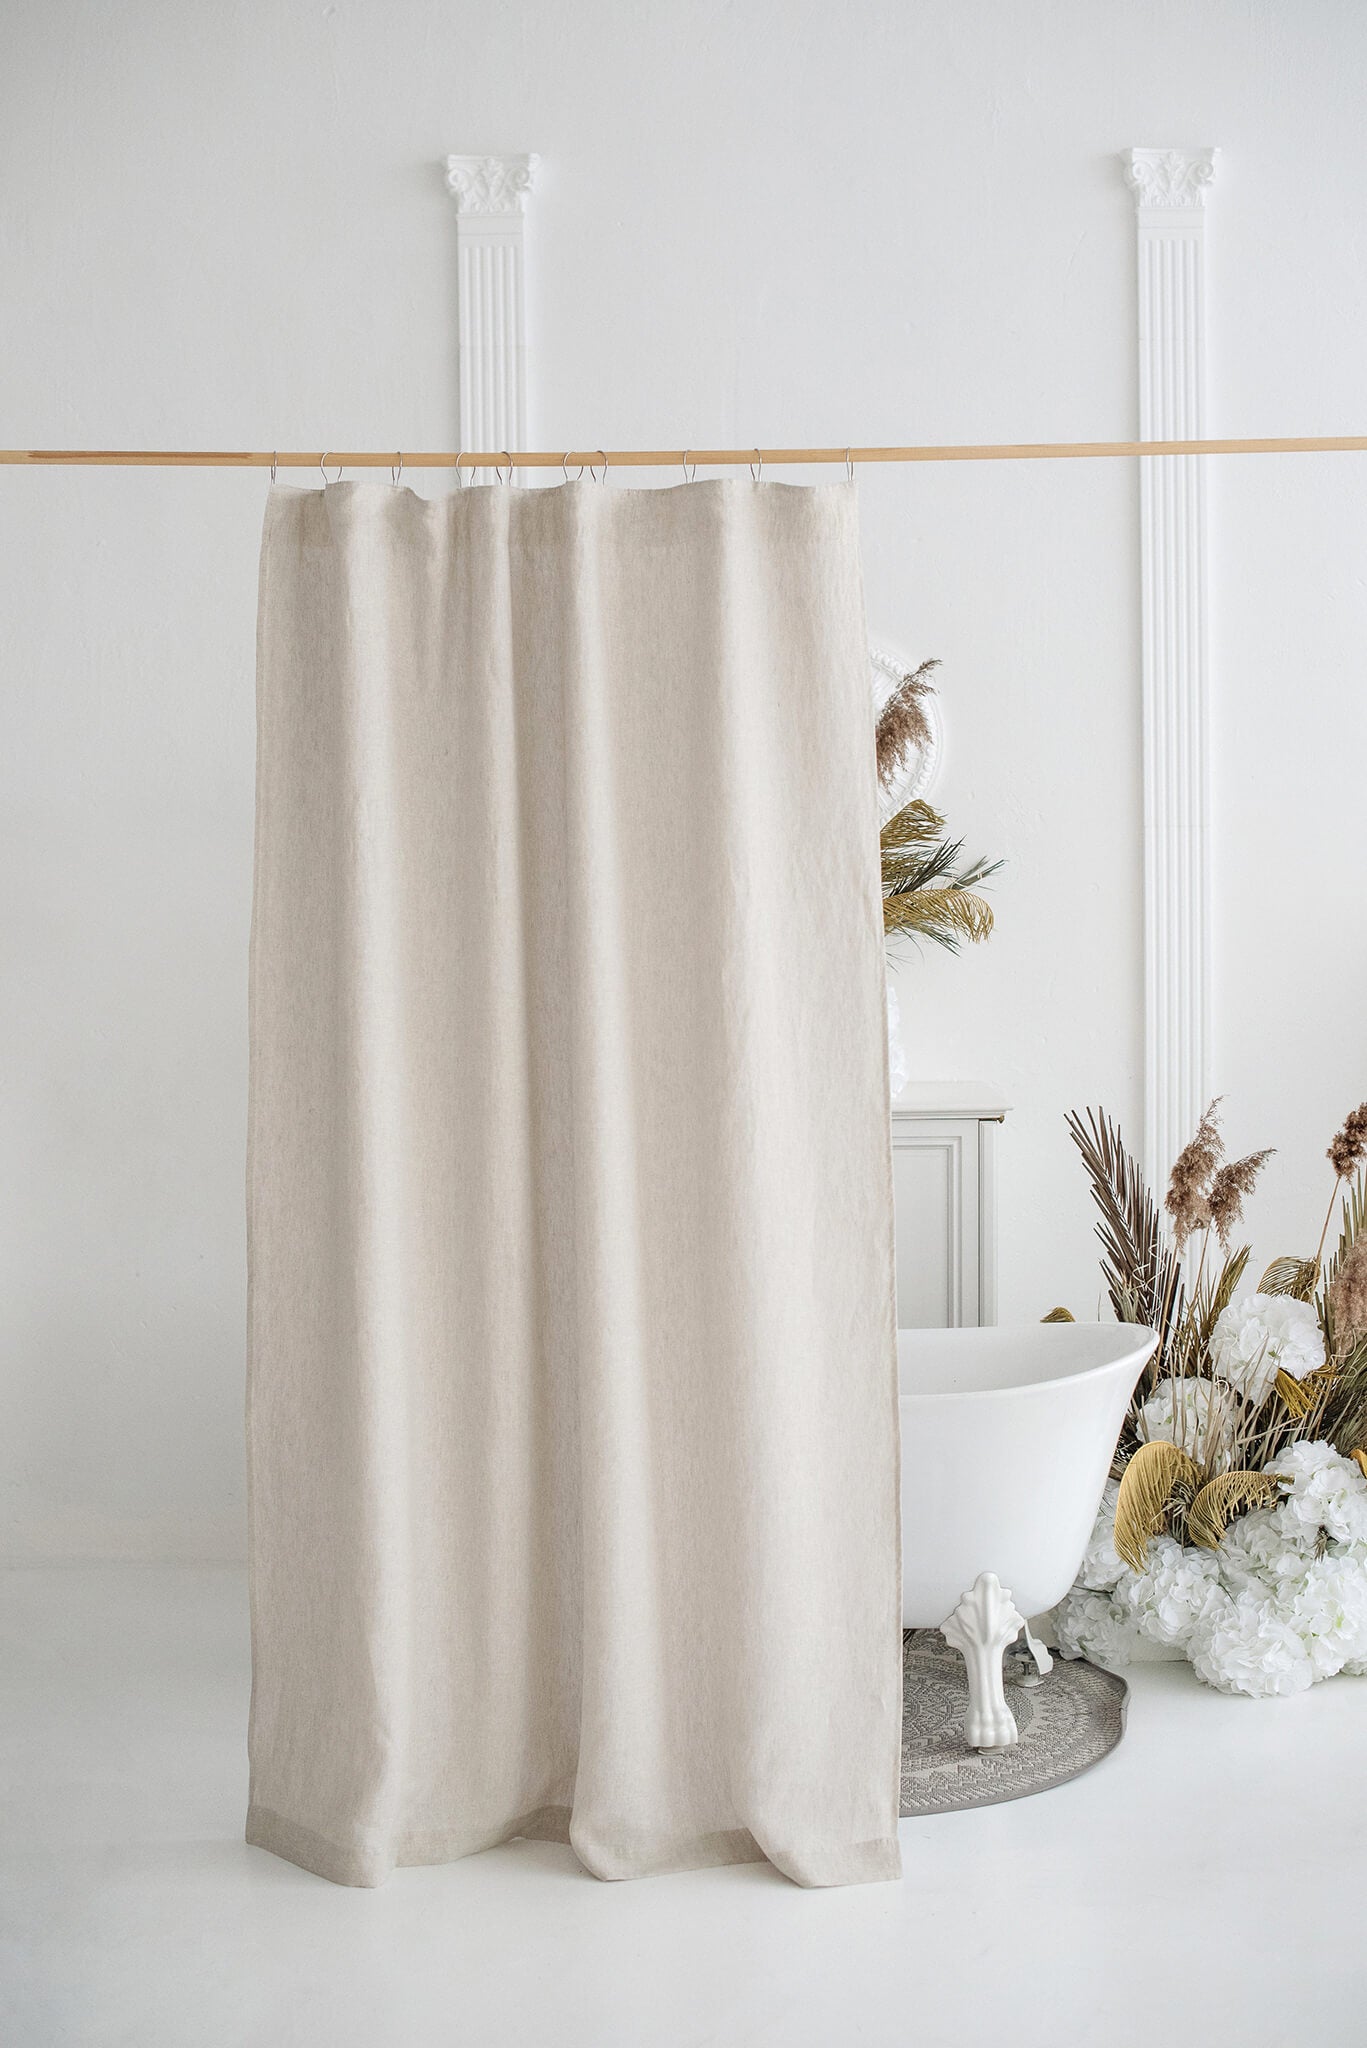 Linen Shower Curtain With Waterproof Lining In Natural Light Color Easy Crafts